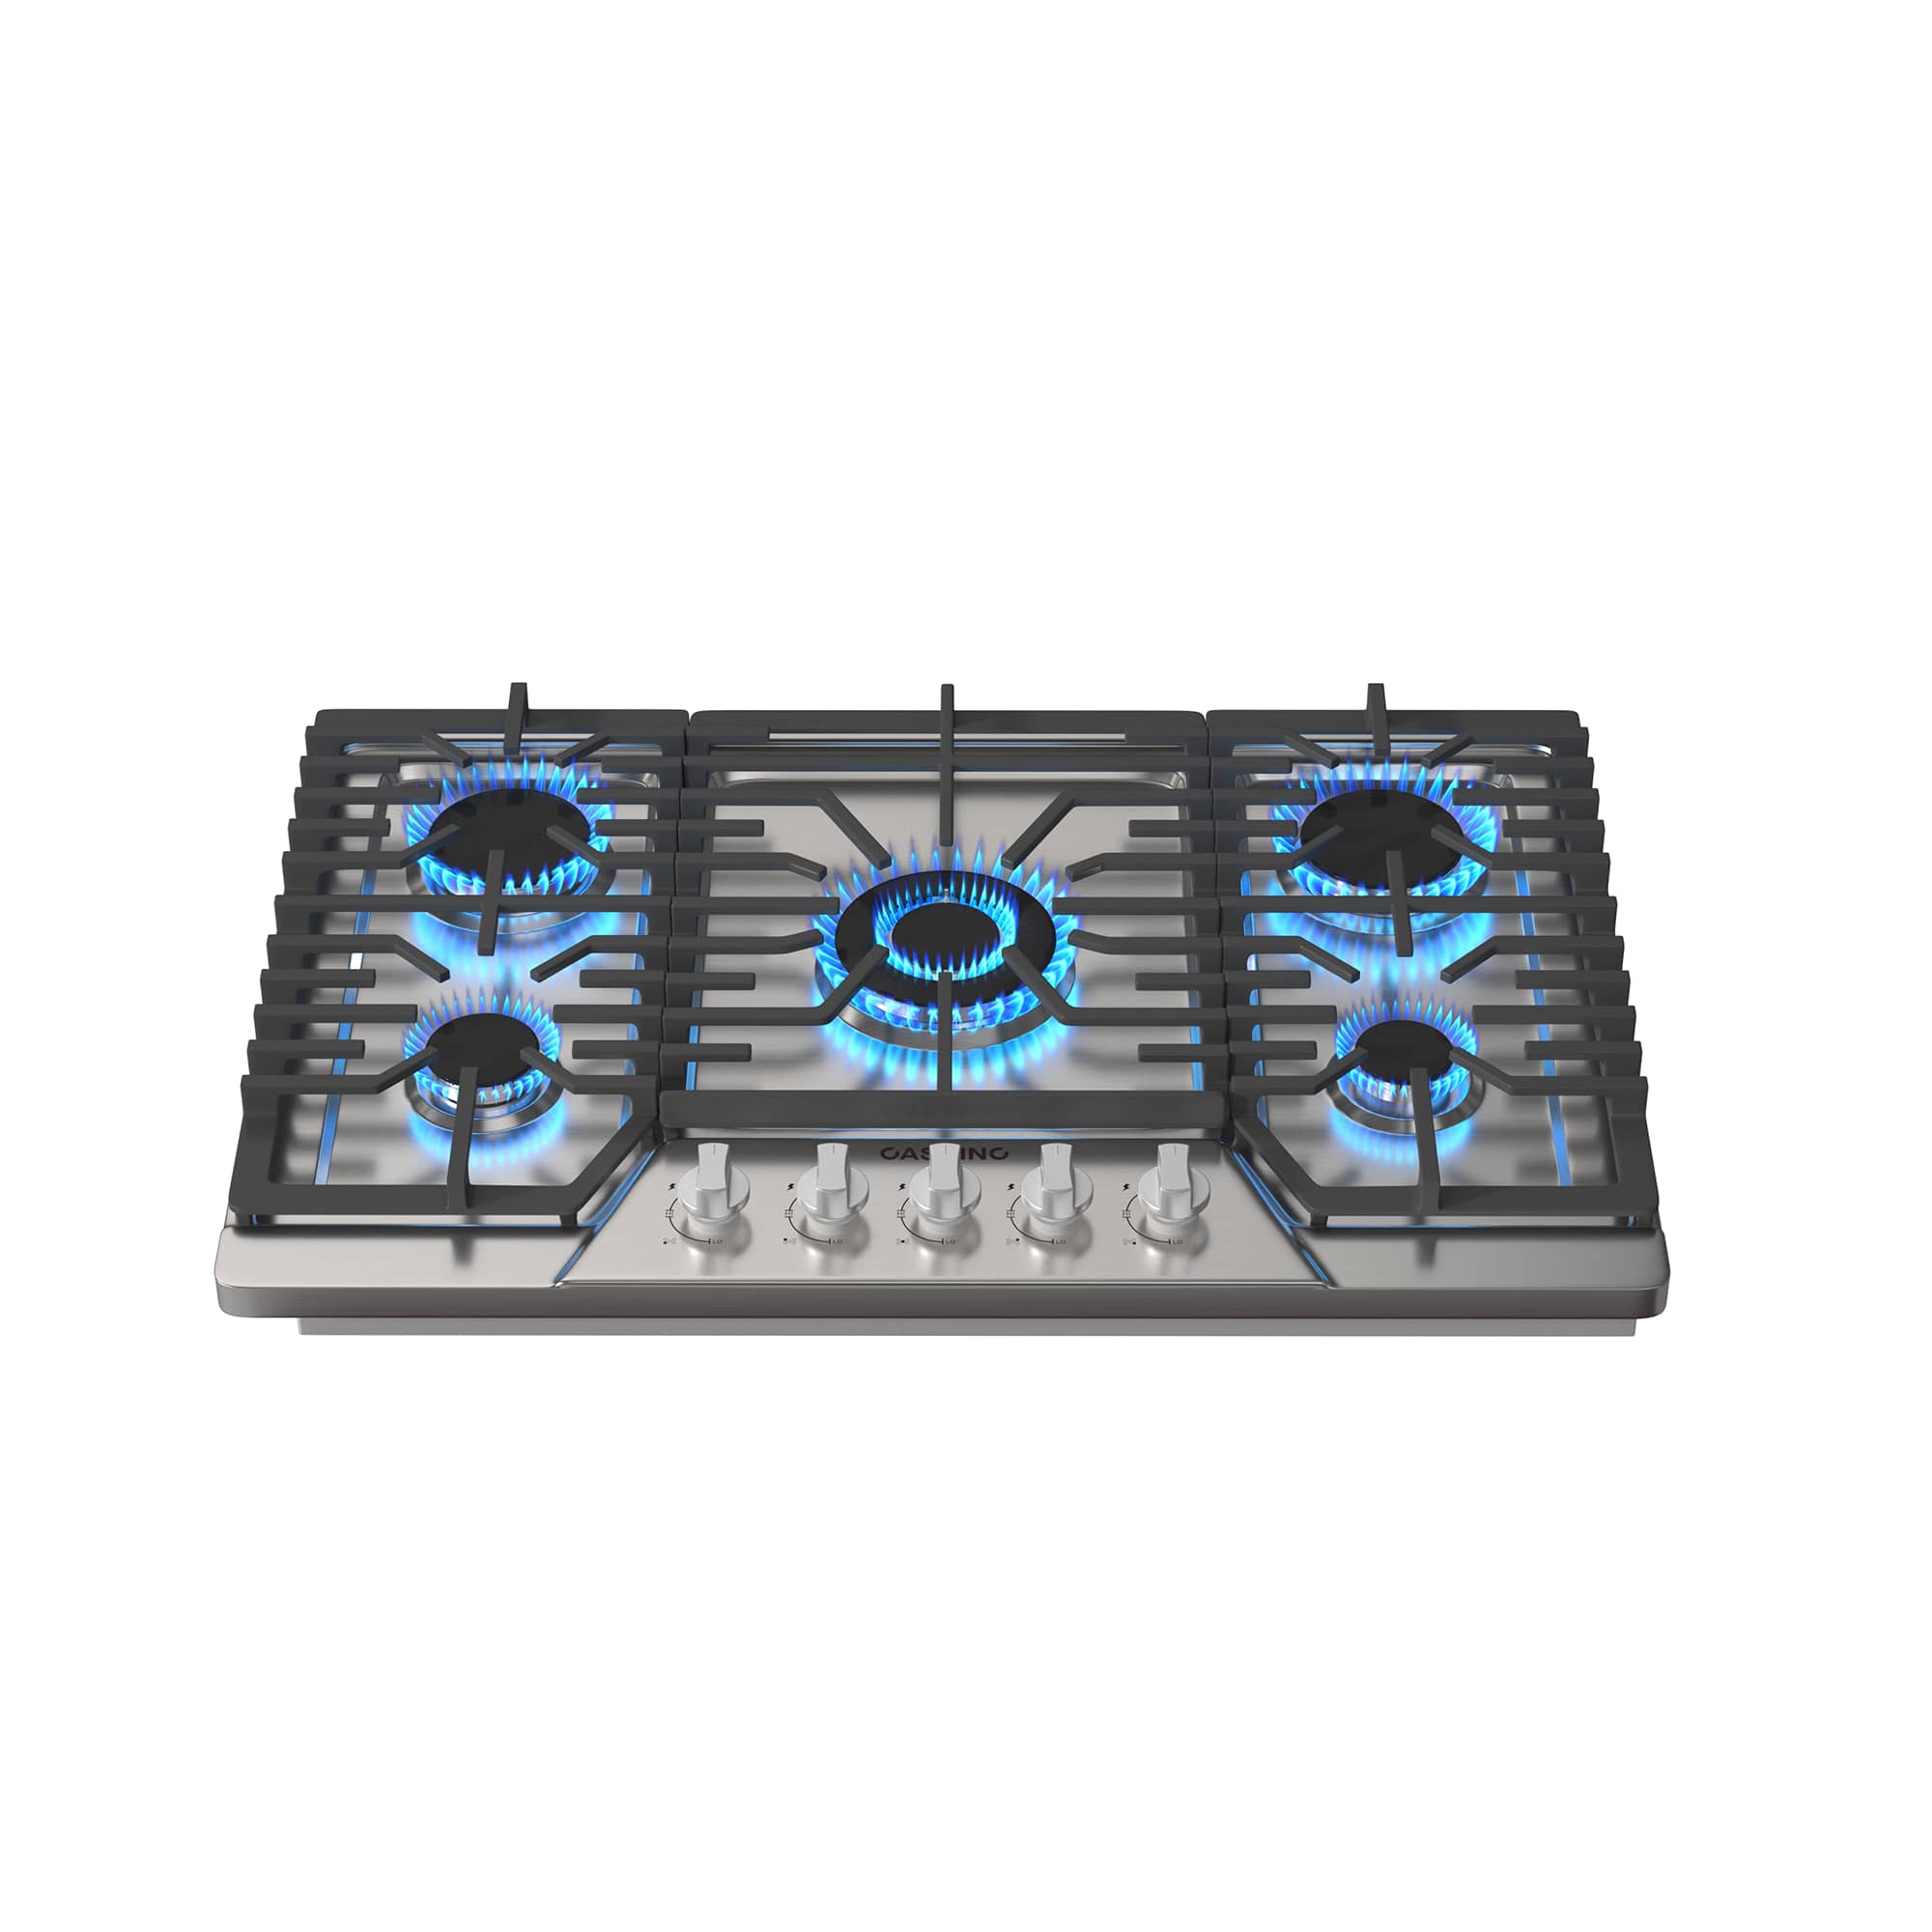 Built-in 30 in. Gas Cooktop in Stainless Steel with 5 Burners including Power Burners and LP Kit, CSA Certified